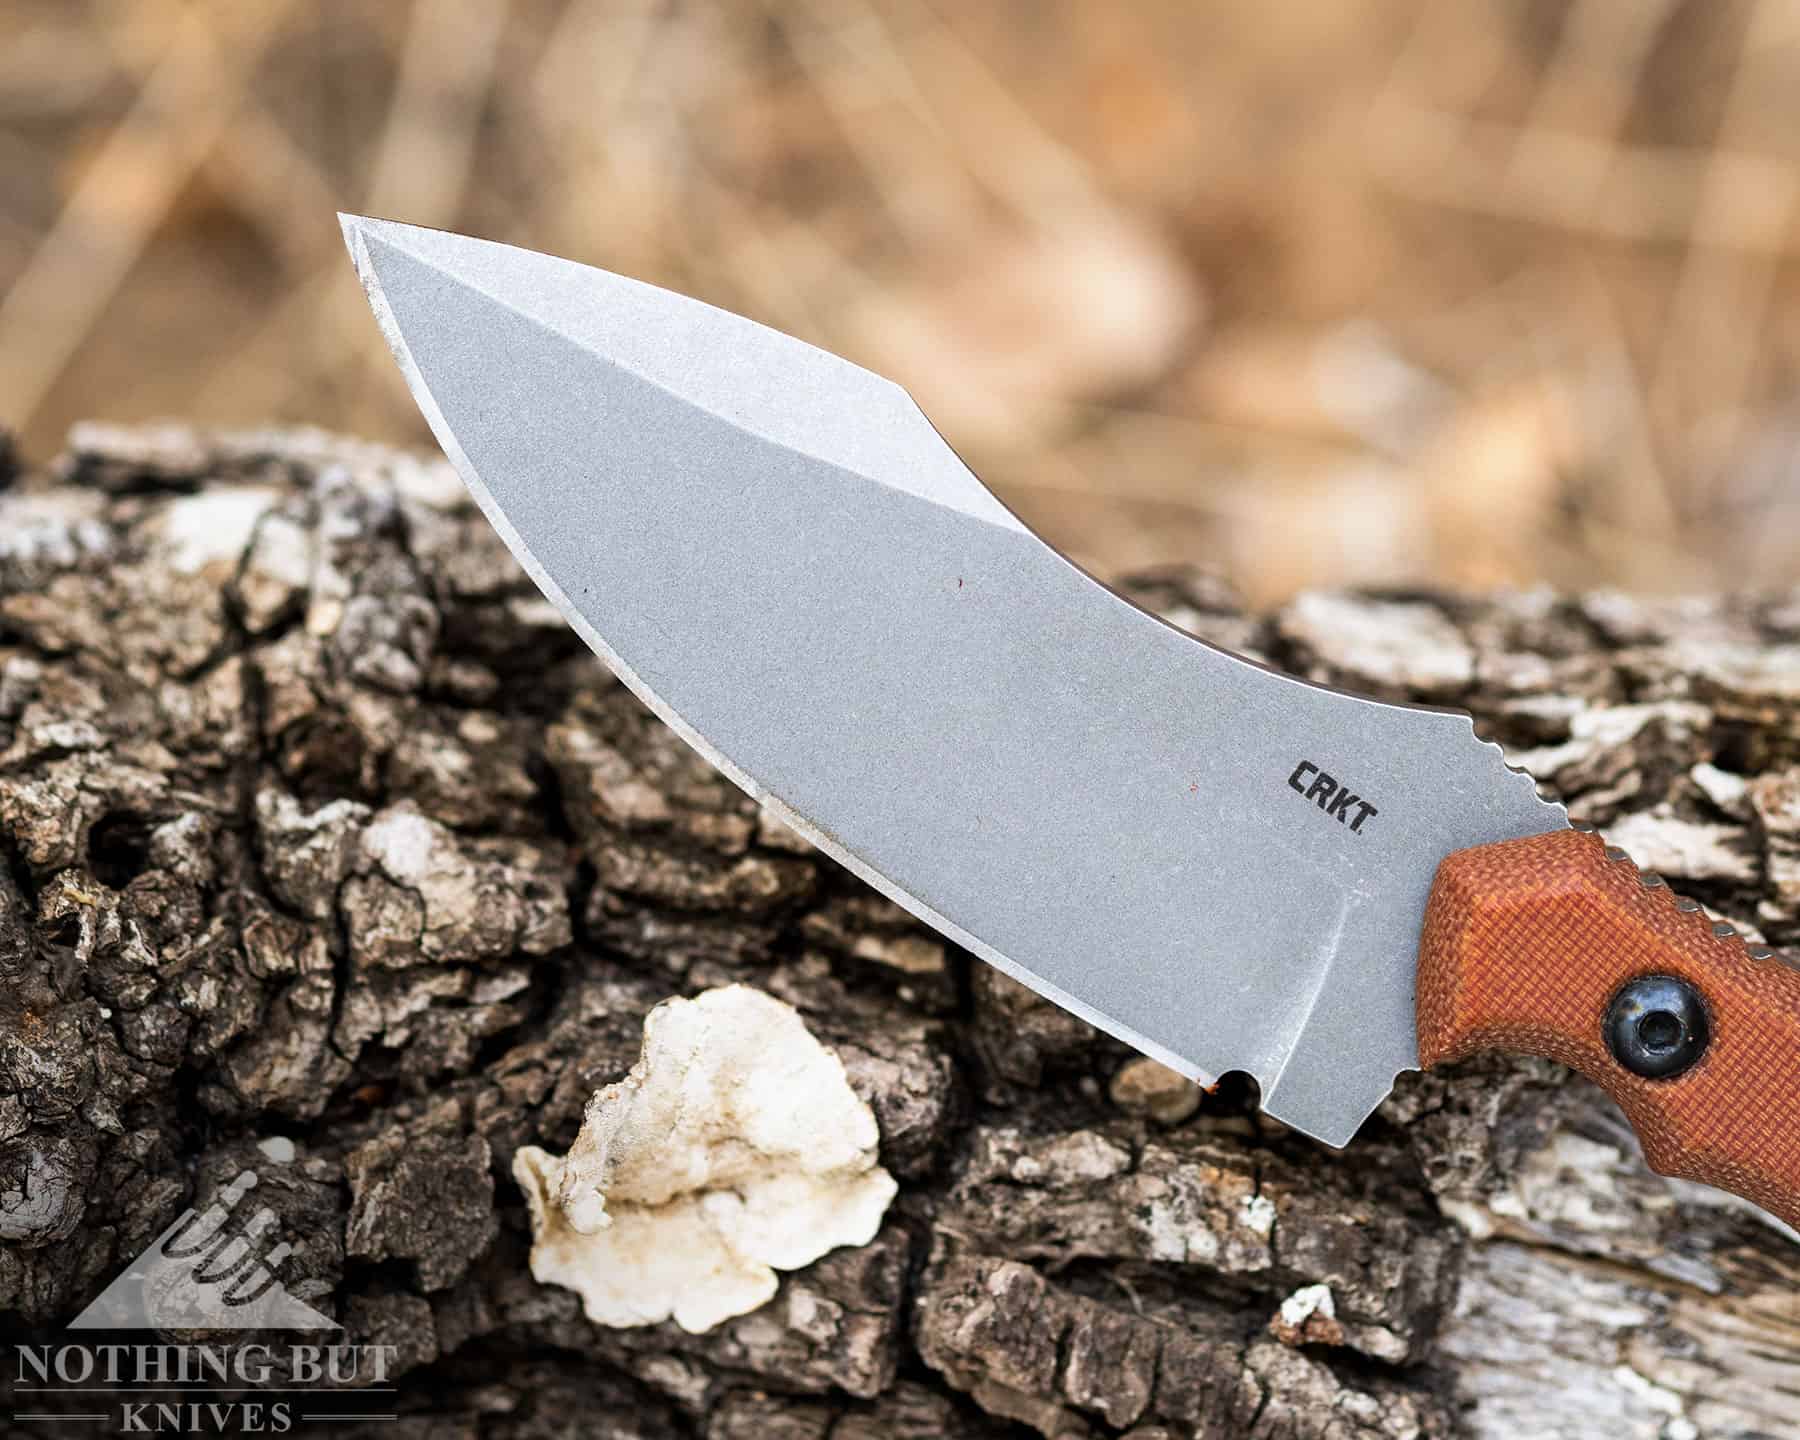 The curved bvlade of the Bugsy almost looks like a nessmuk style blade. 